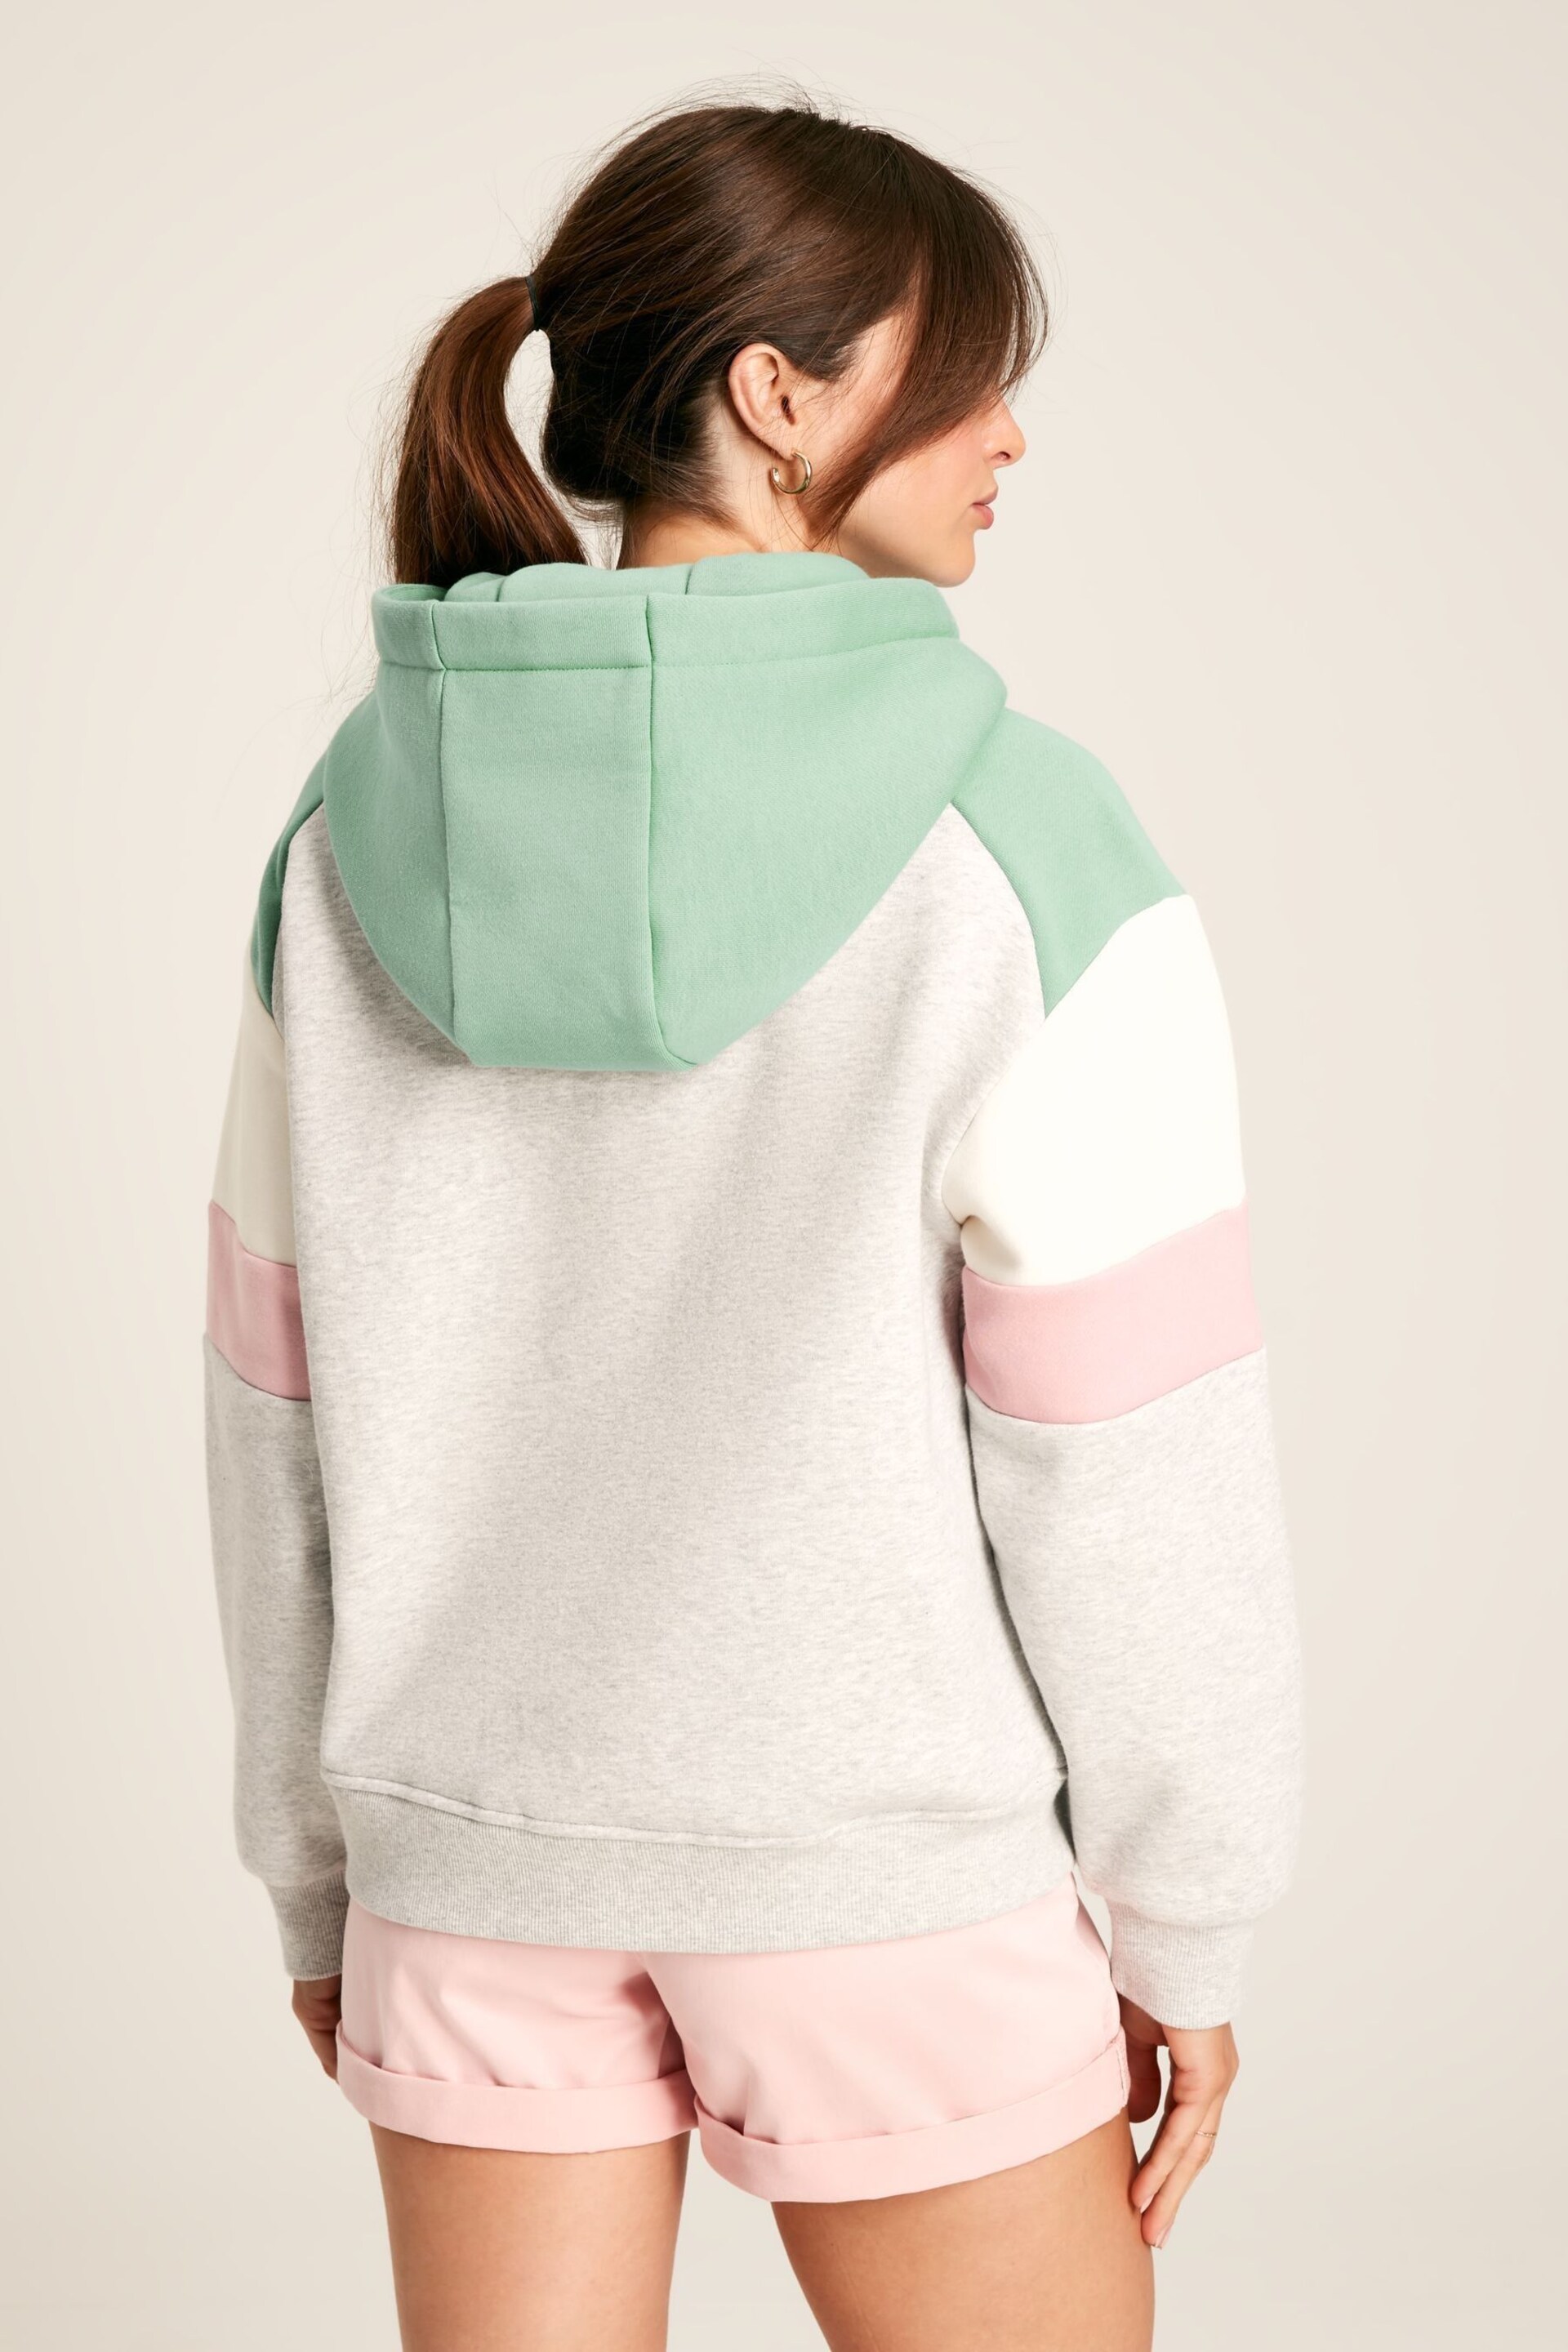 Joules Milbourne Grey, Pink & White Embroidered Hoodie - Image 3 of 7